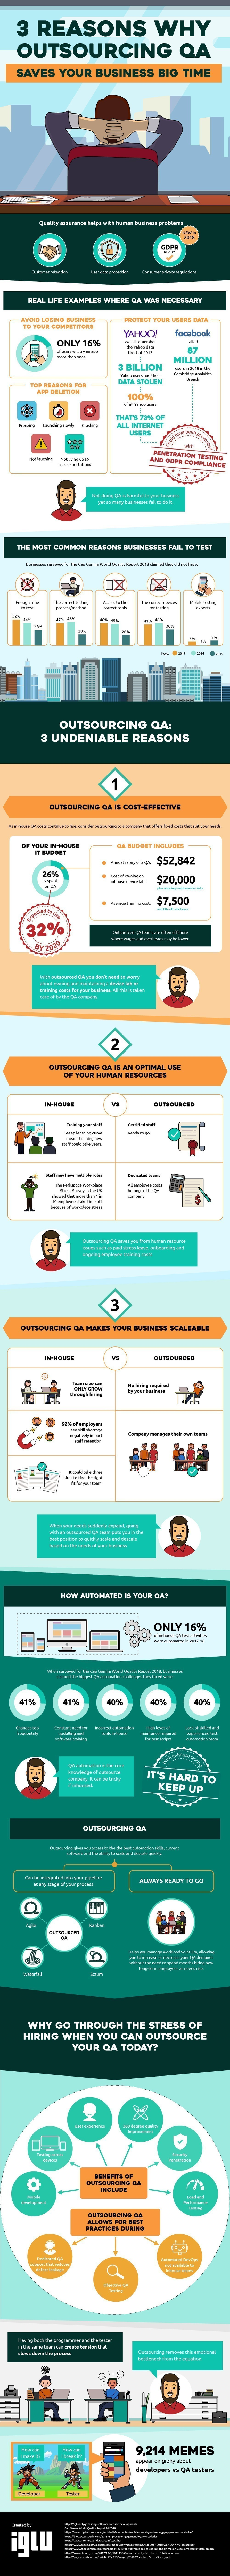 3 Reasons Why Outsourcing Your QA Saves Your Business Big Time